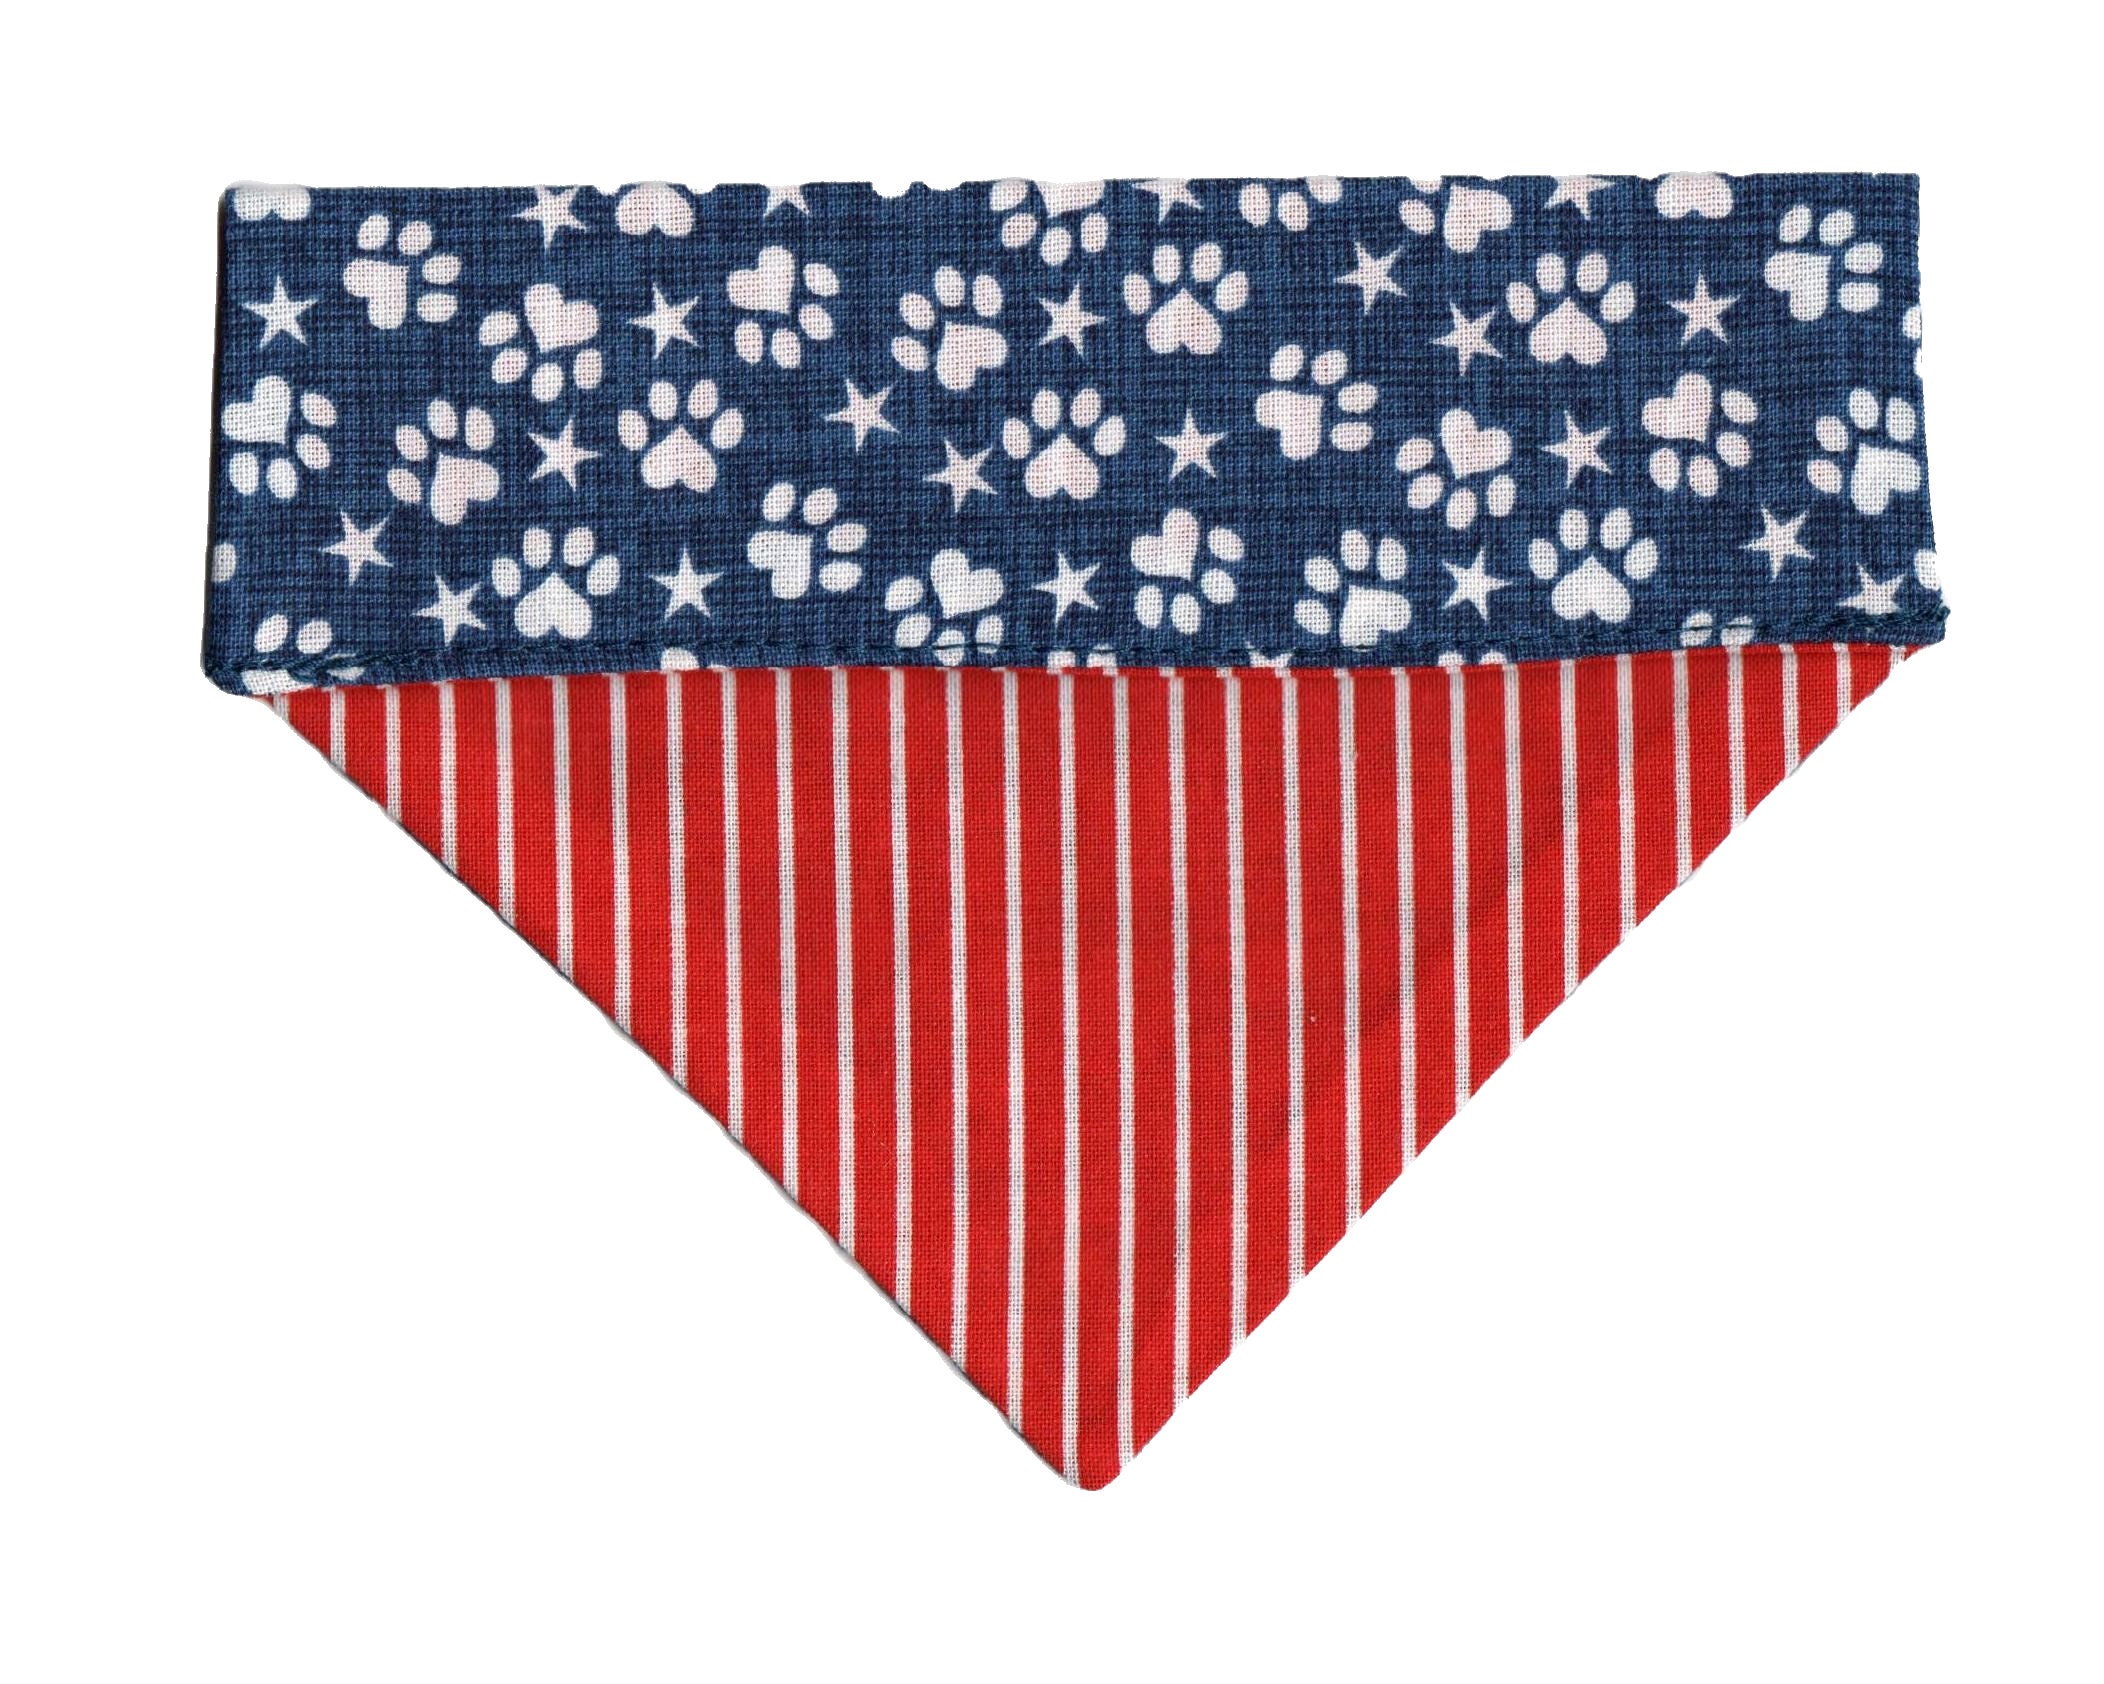 Over the Collar Thread Through Slip On Dogwear Petwear Neckwear Reversible US Flag Prints Red White and Blue Stars Stripes Patriotic Dog Bandanna 